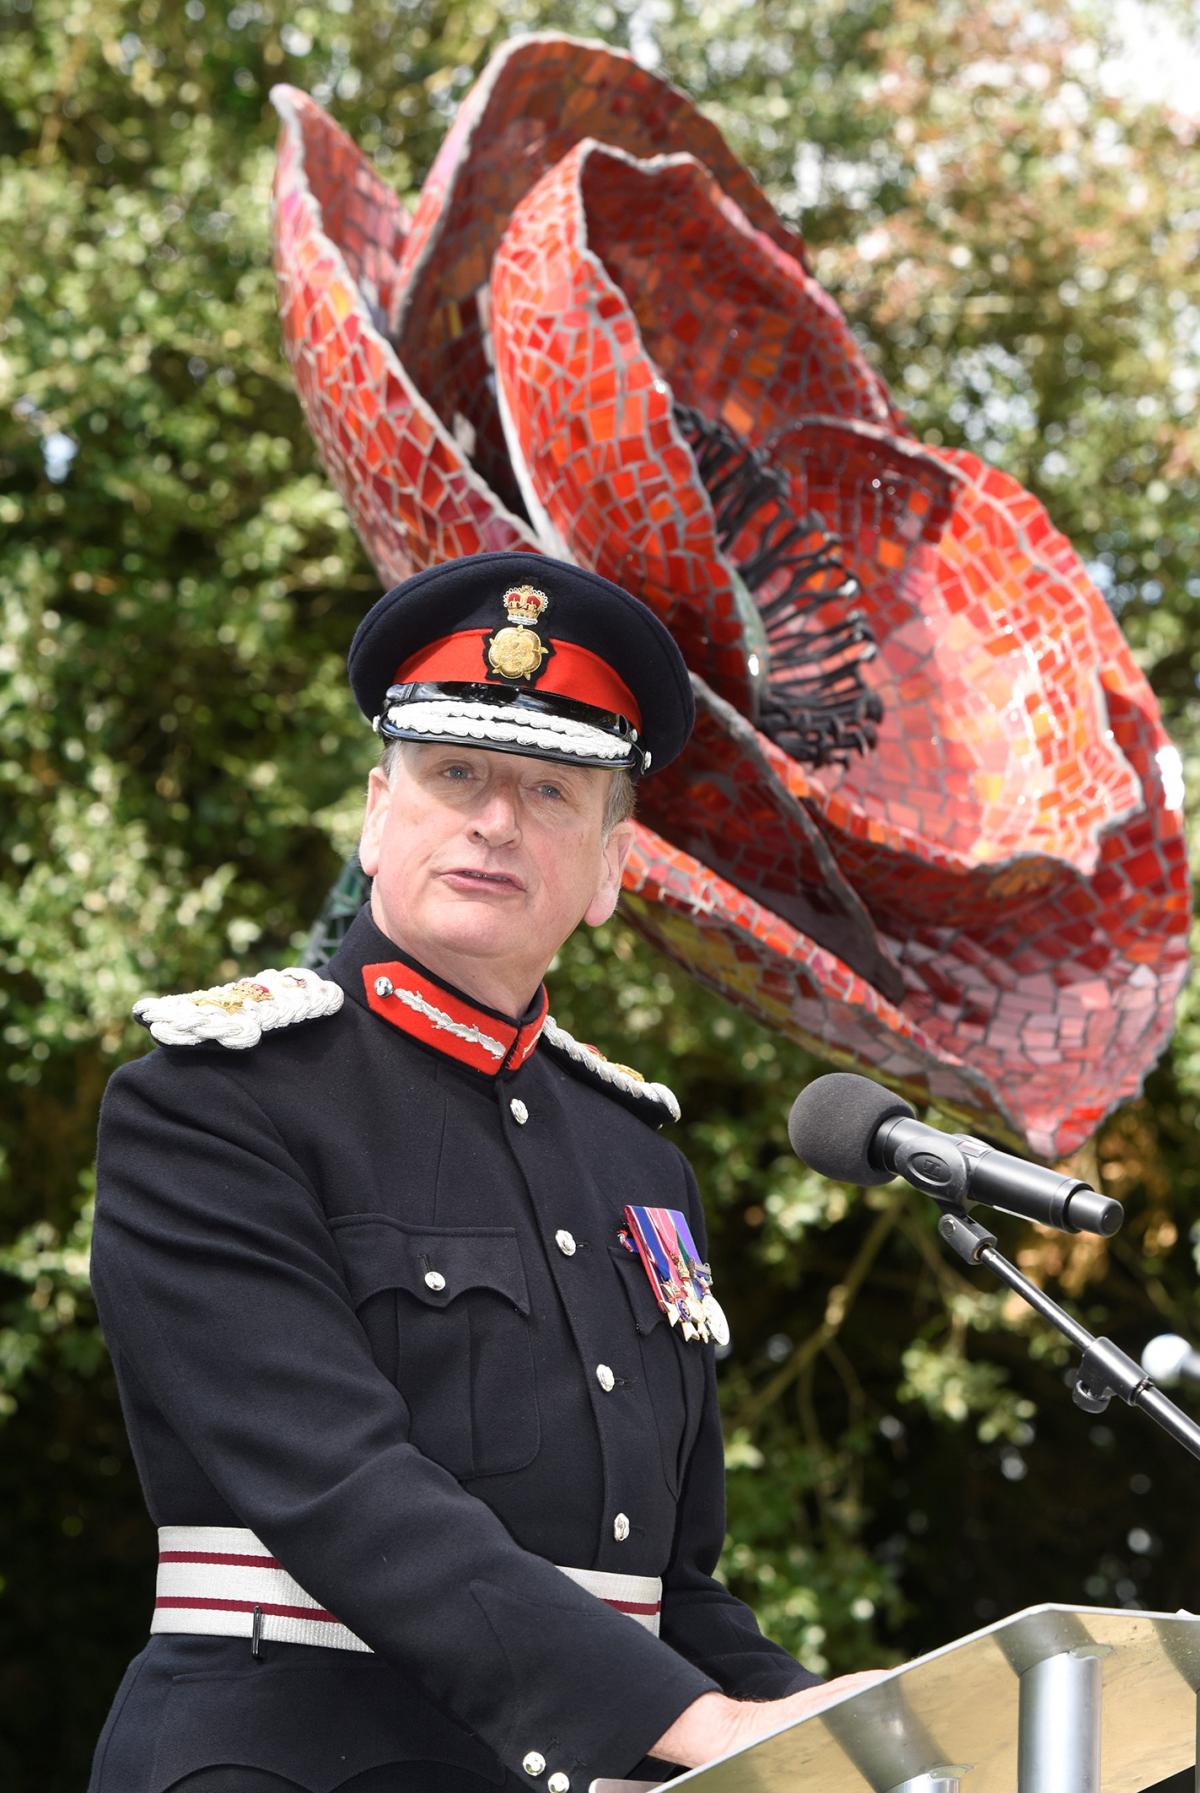 MEMORIAL SERVICE: The High Sheriff Sir Nicholas Lechmere Bt delivers a speech at the unveiling of a commemorative poppy sculpture to honour the Worcestershire Yeomanry who fell in the battles of Oghratina and Qatia during World War One (Picture by David G